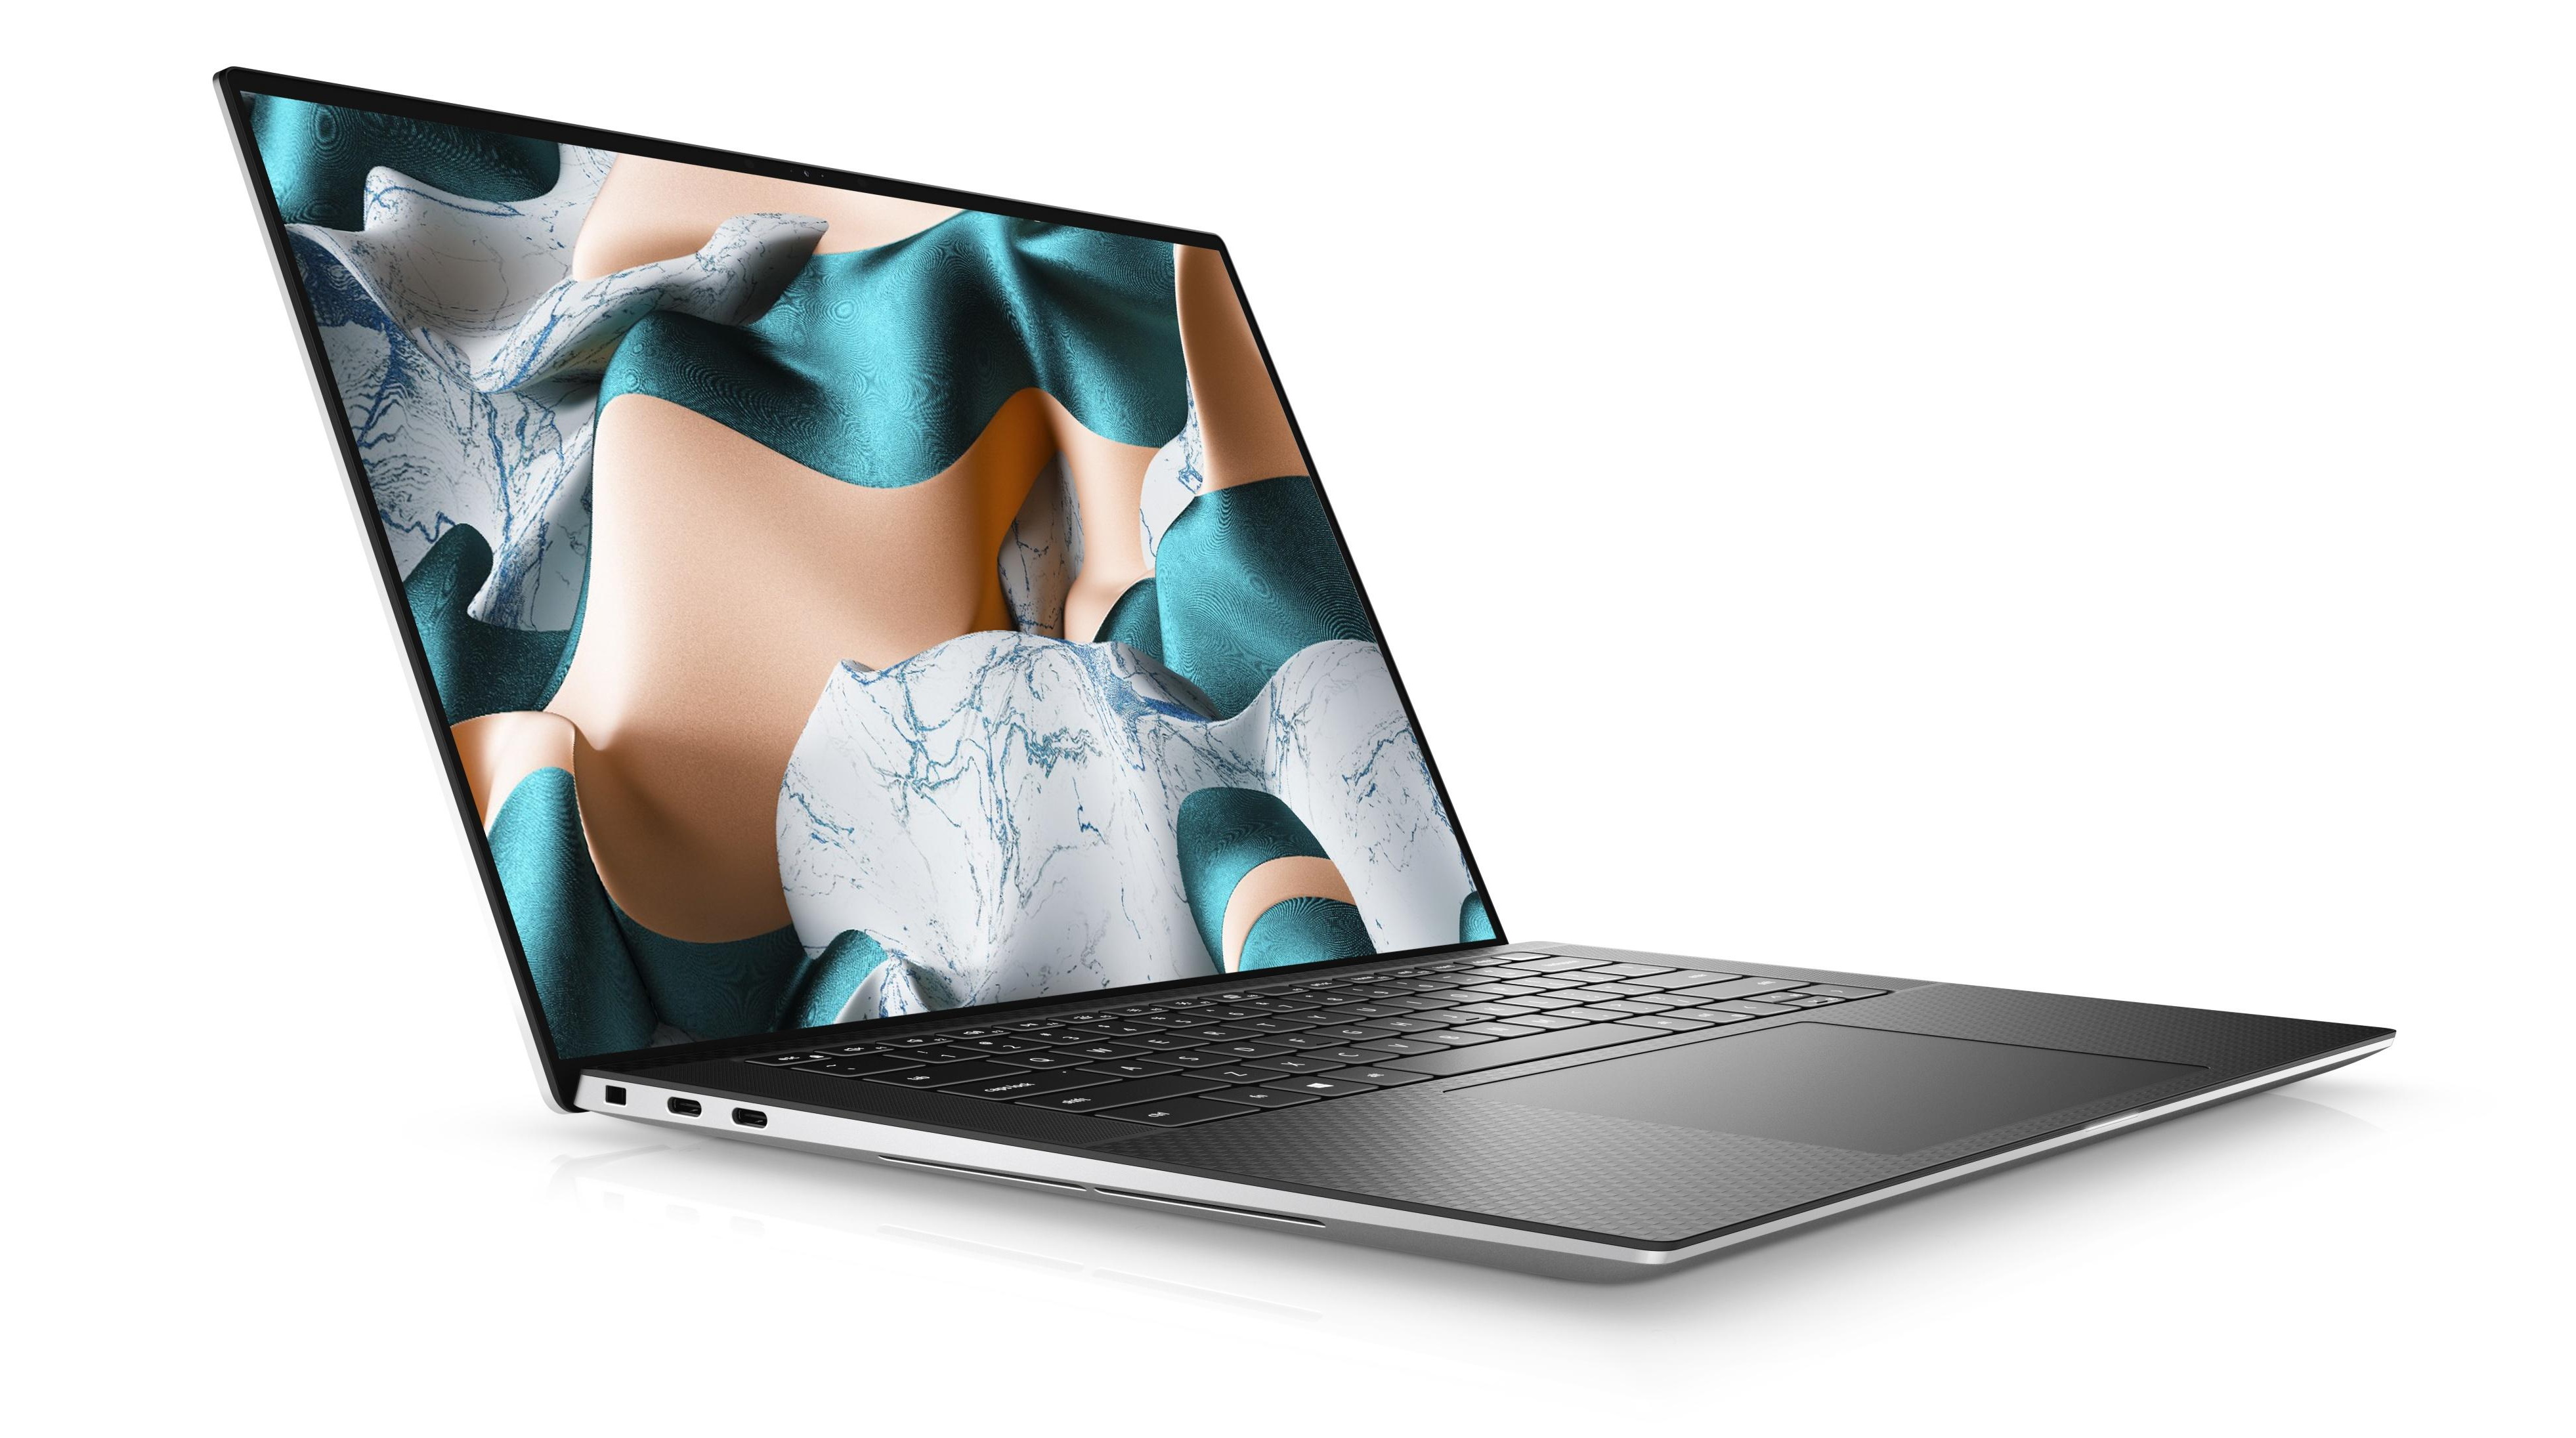 Dell XPS 15 against a white background